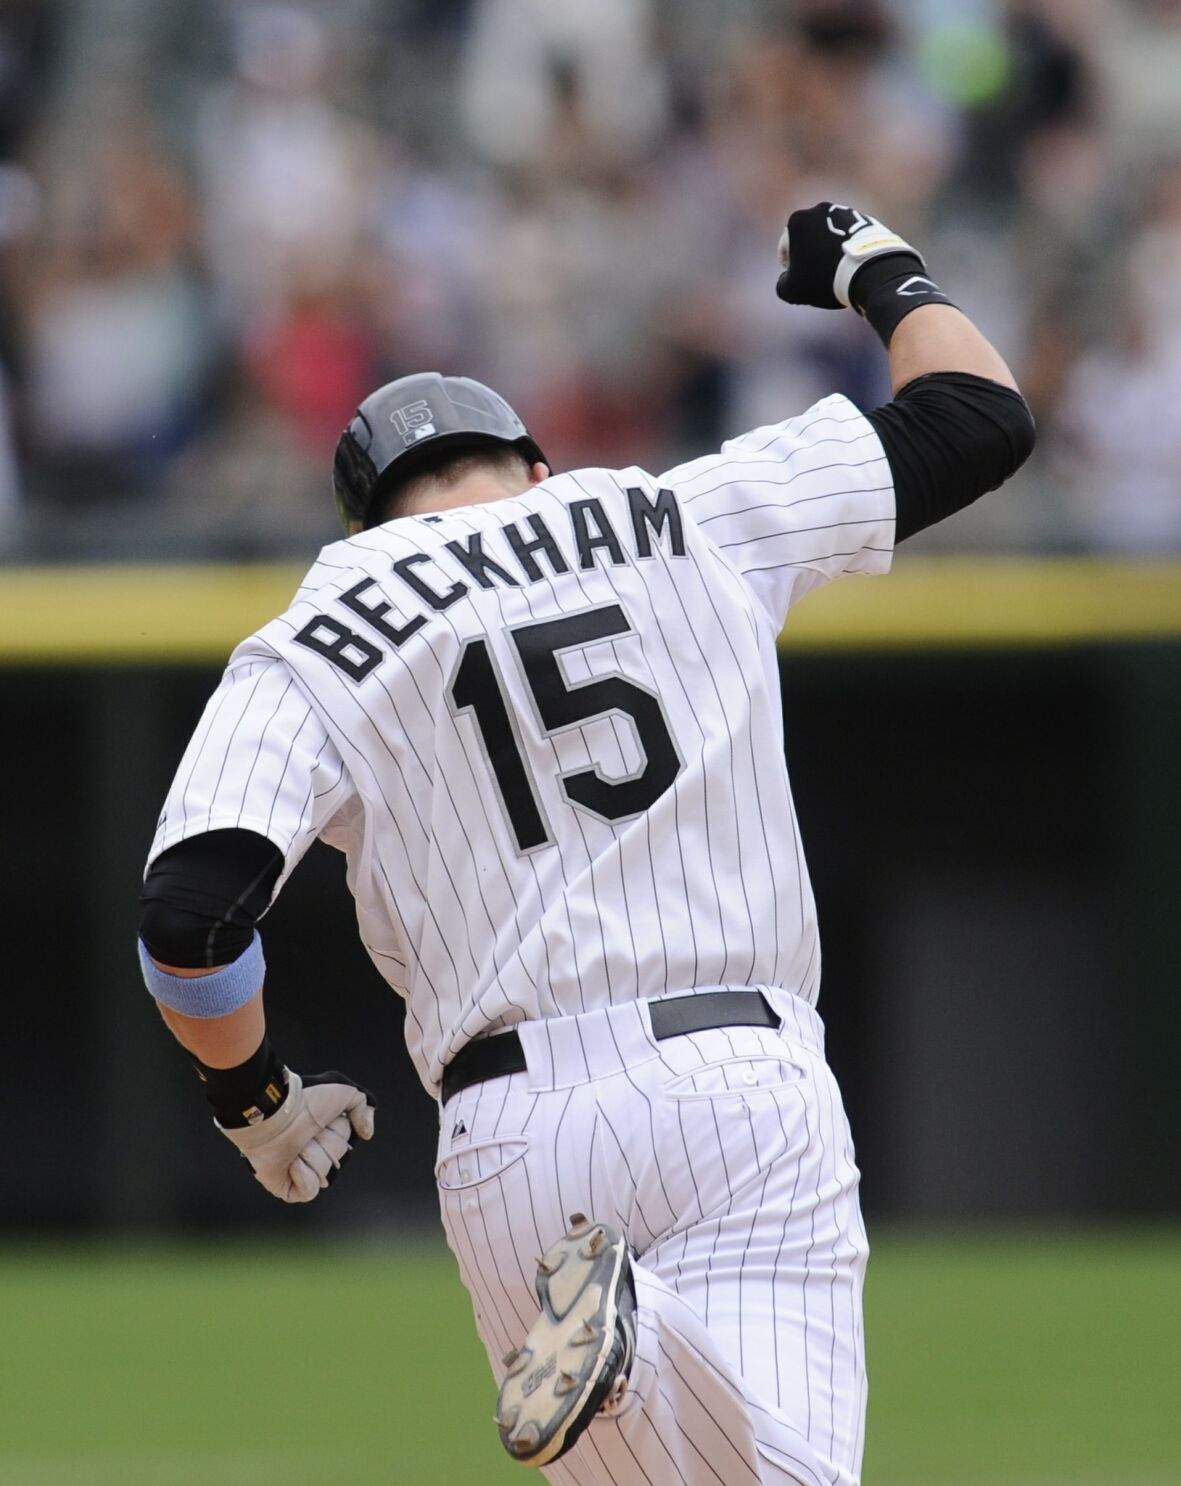 Beckham's HR gives White Sox 3-2 win over Texas in 11